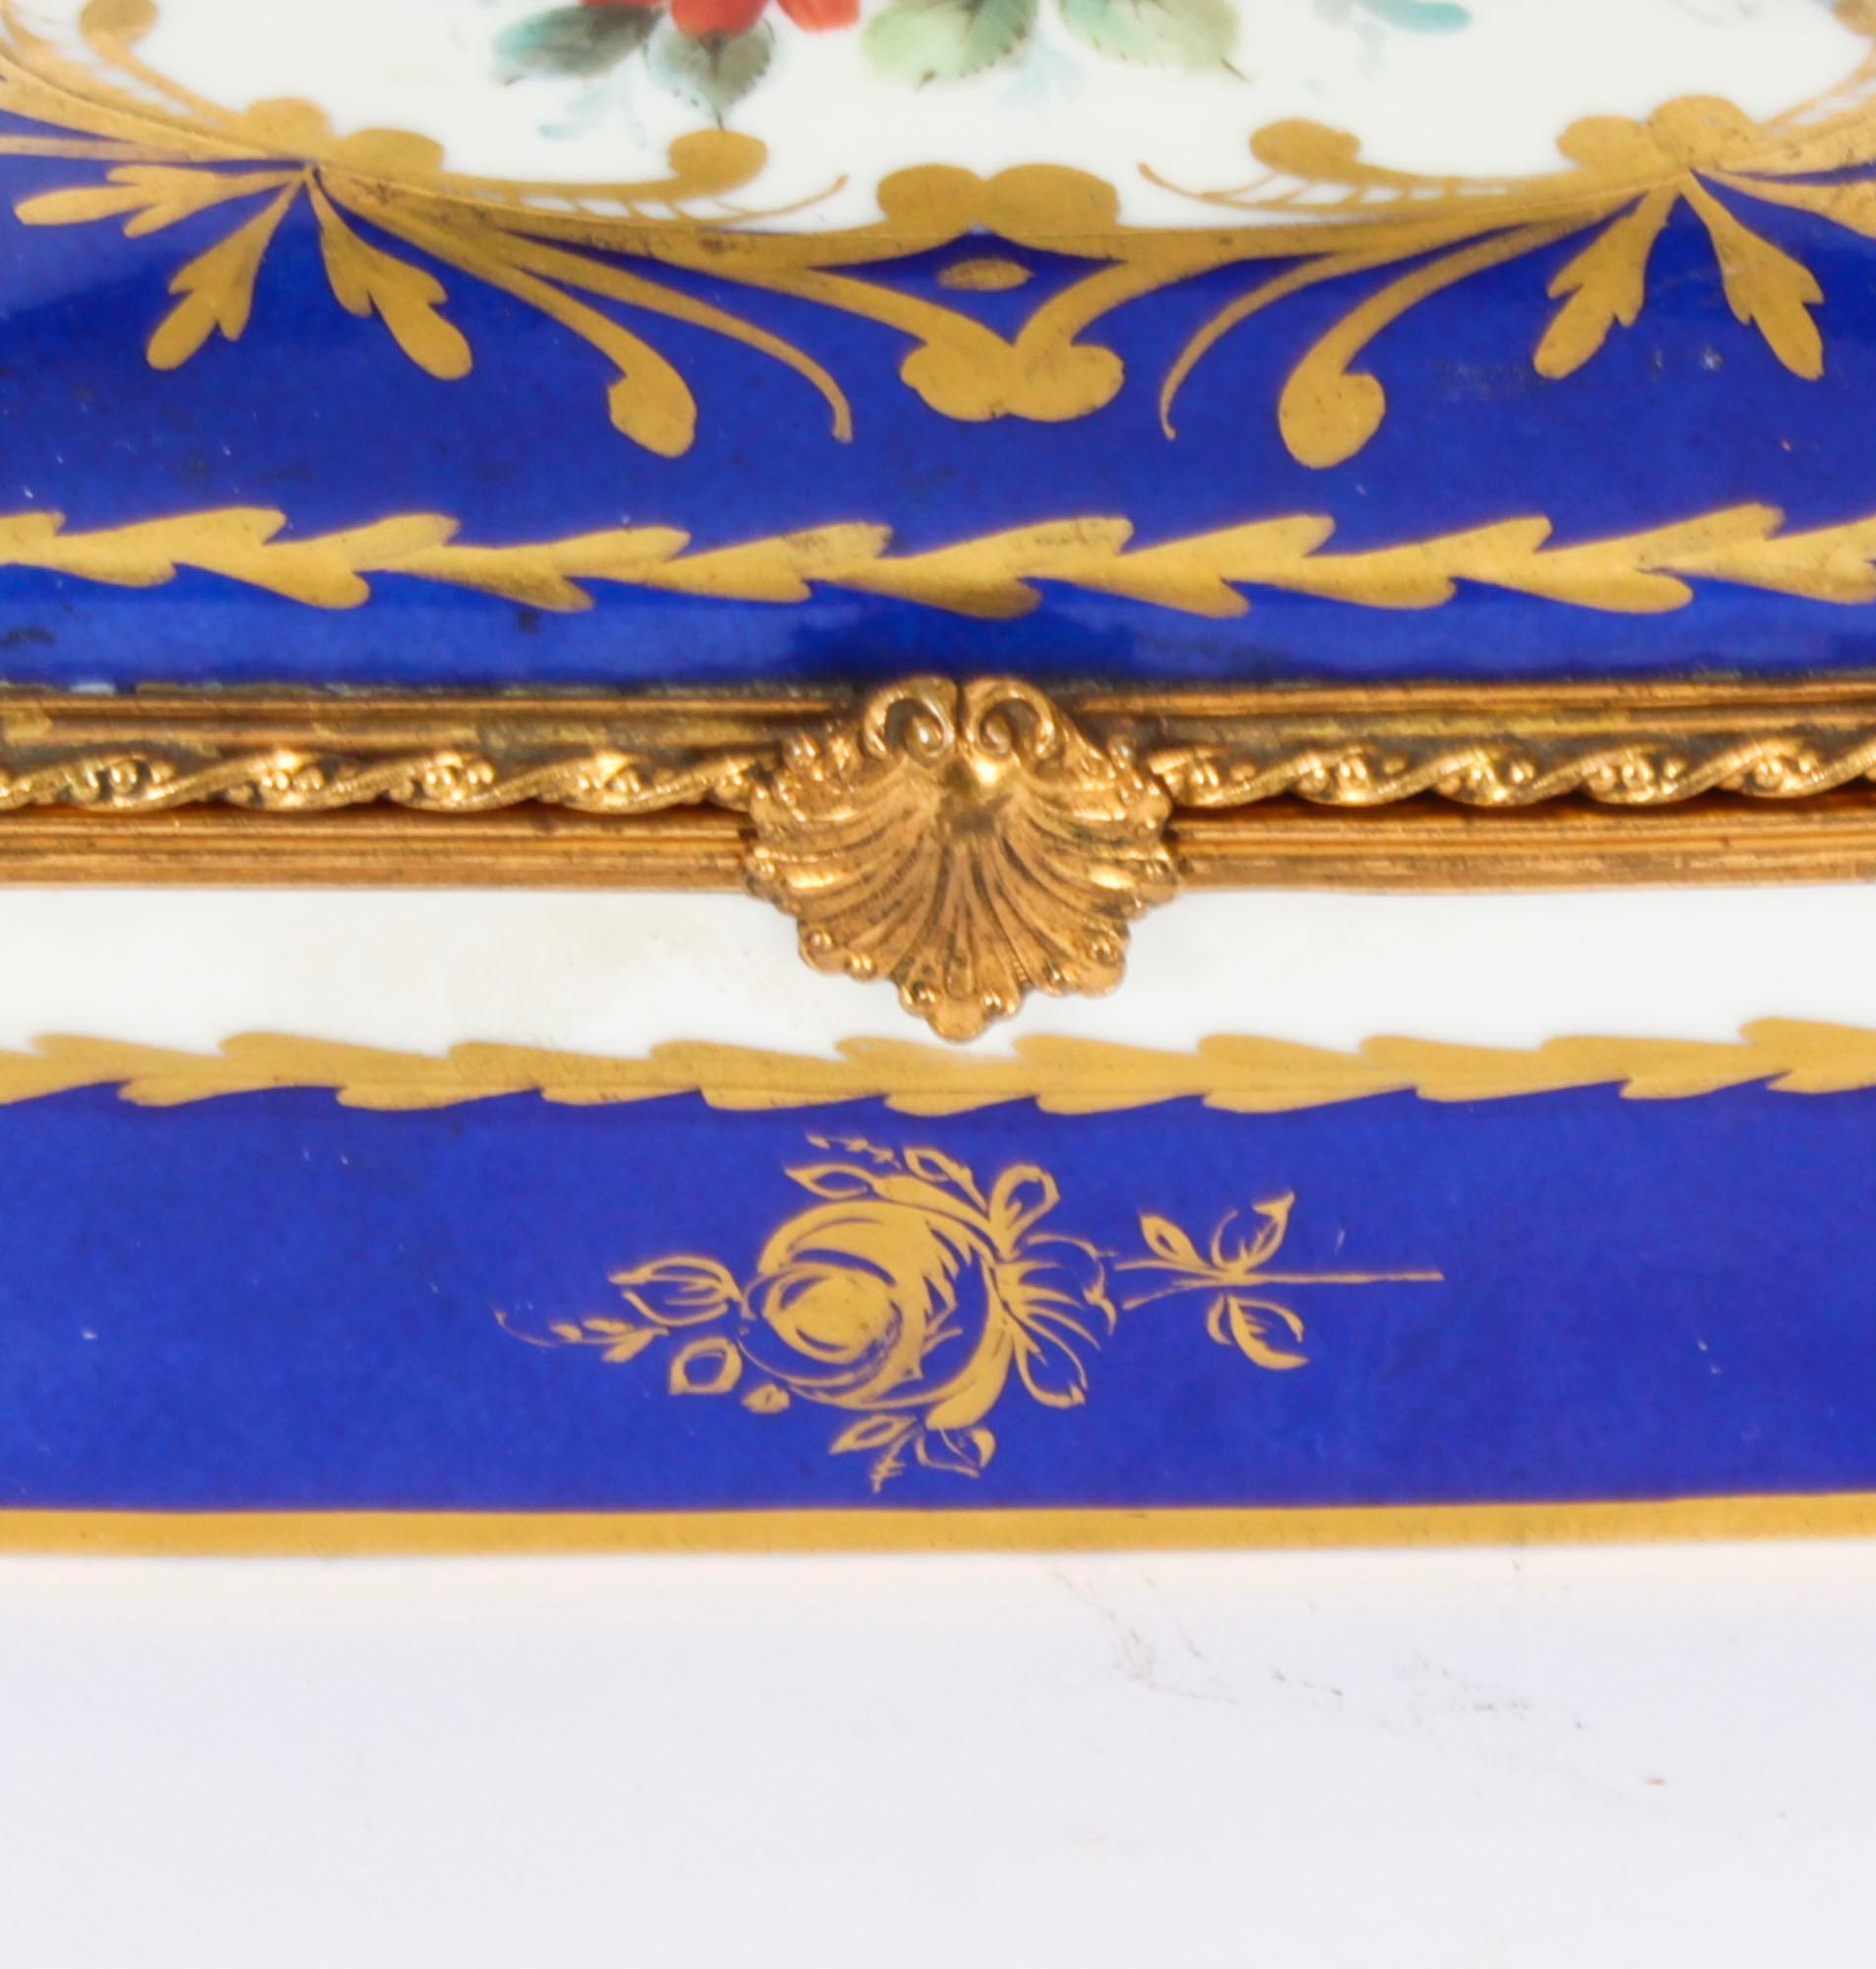 French Antique Limoges Royal Blue Ormolu Mounted Casket Box 19h Century For Sale